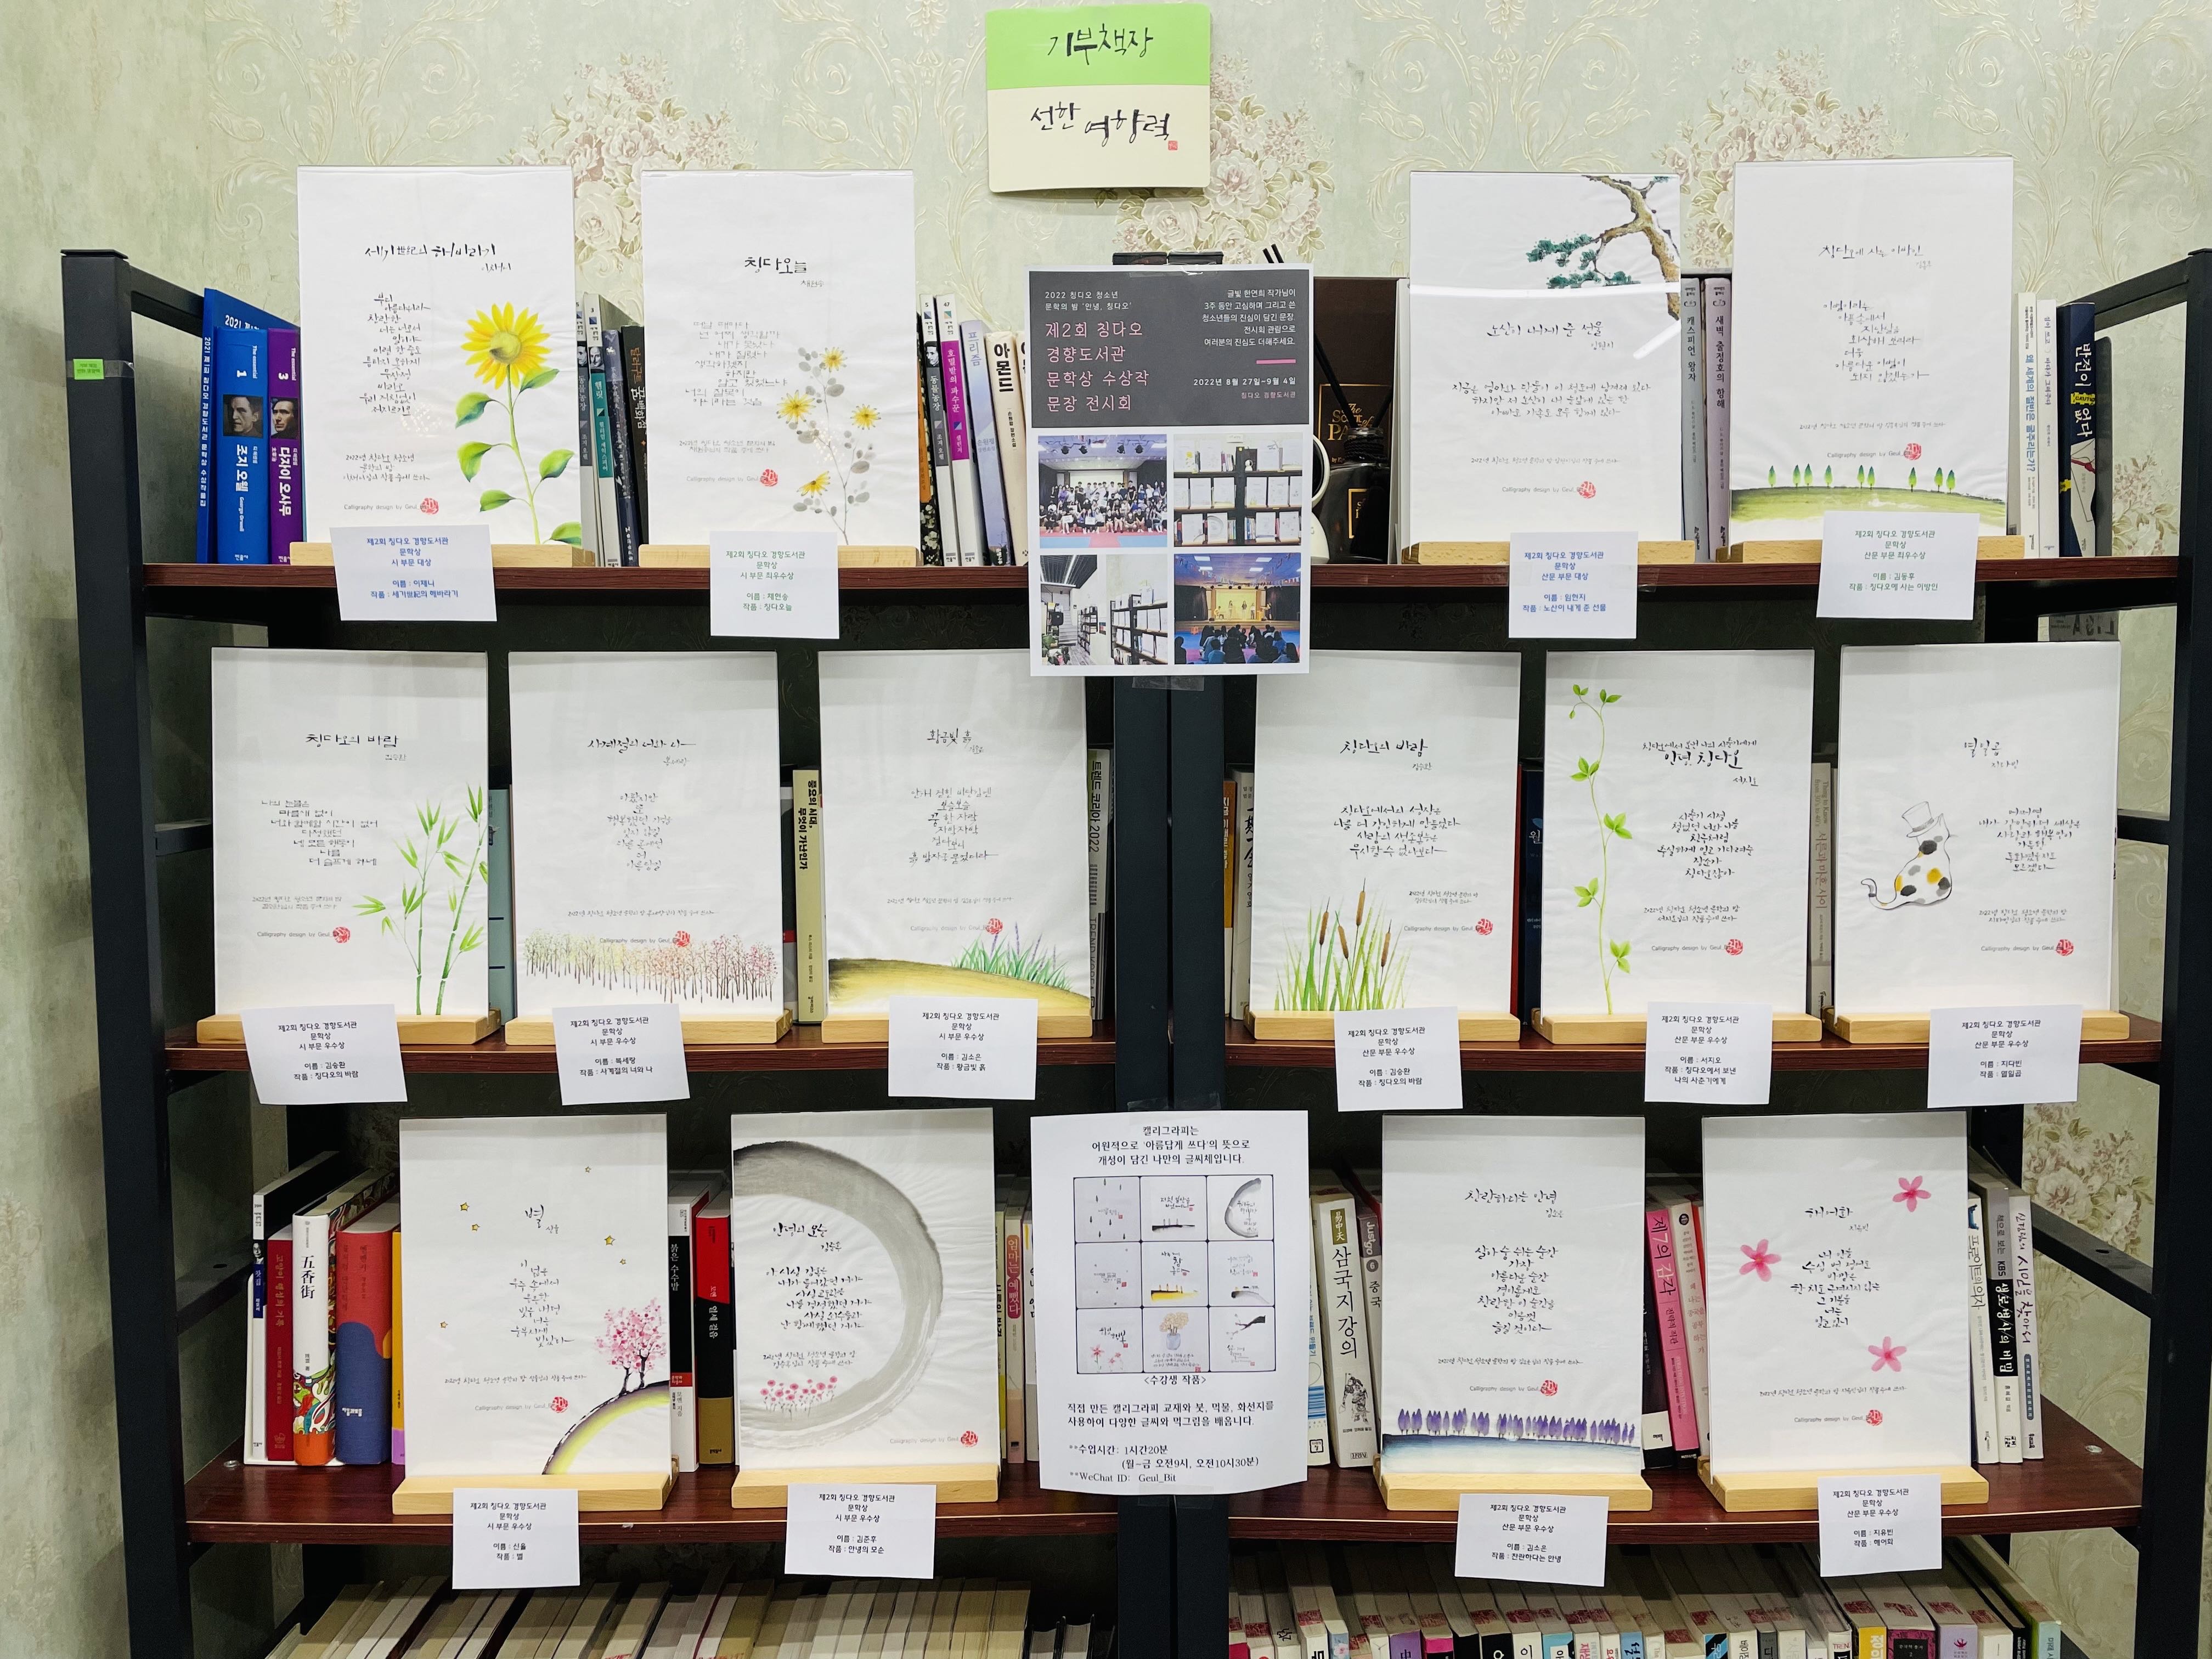 Small exhibition space composed of children’s poems (courtesy of the Gyeonghyang Library)